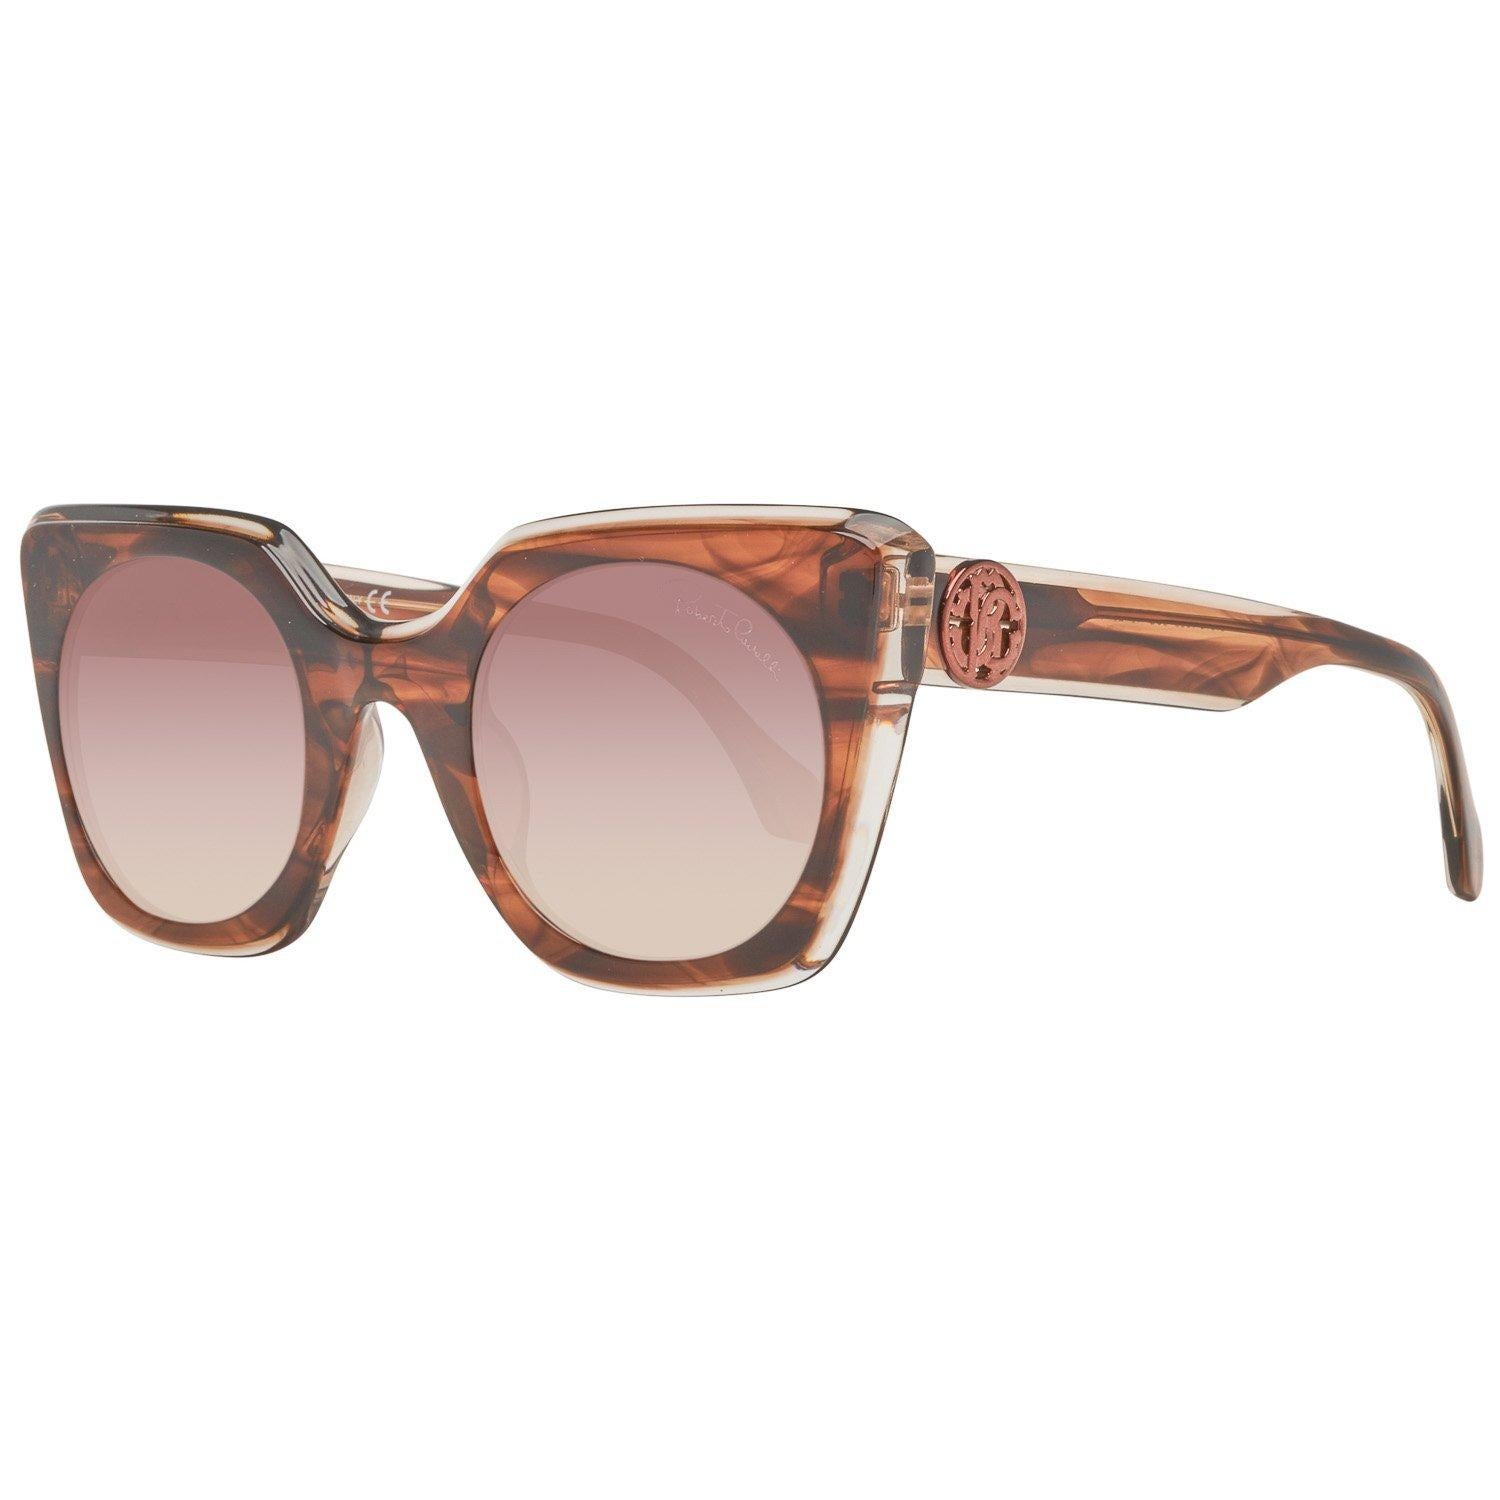 Details

MATERIAL: Acetate

COLOR: Brown

MODEL: RC1068 4856G

GENDER: Women

COUNTRY OF MANUFACTURE: Italy

TYPE: Sunglasses

ORIGINAL CASE?: Yes

STYLE: Butterfly

OCCASION: Casual

FEATURES: Lightweight

LENS COLOR: Brown

LENS TECHNOLOGY: